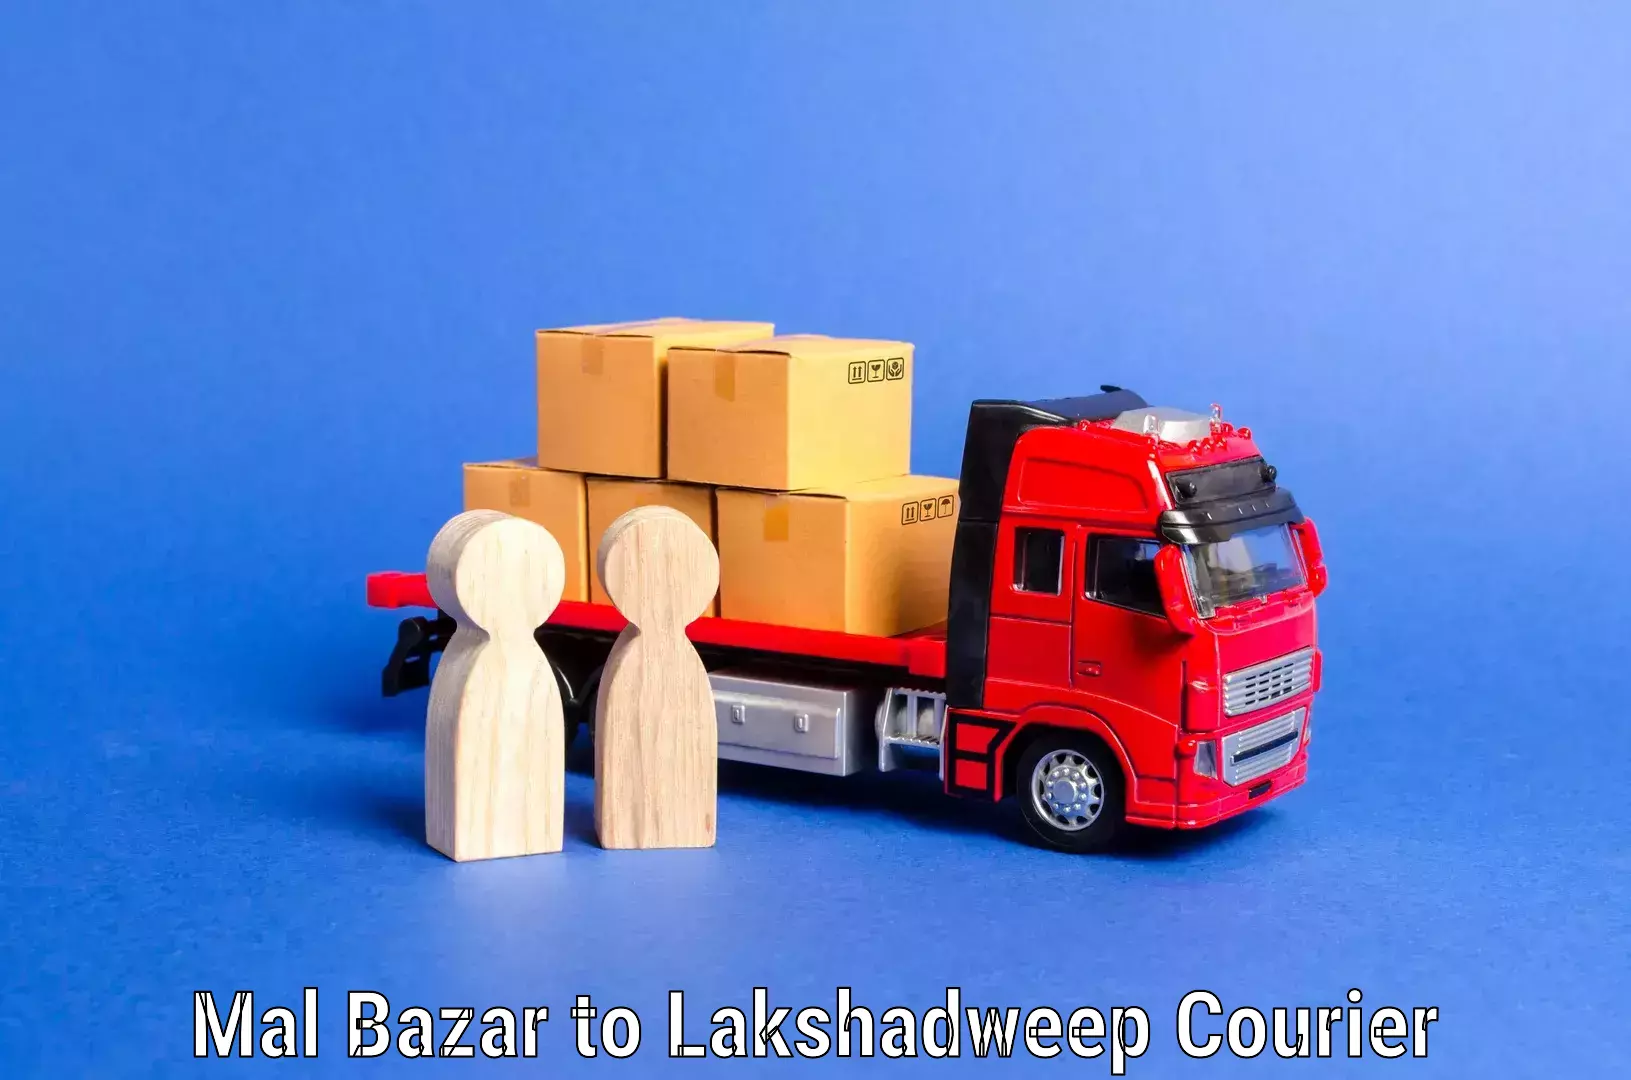 Furniture delivery service Mal Bazar to Lakshadweep